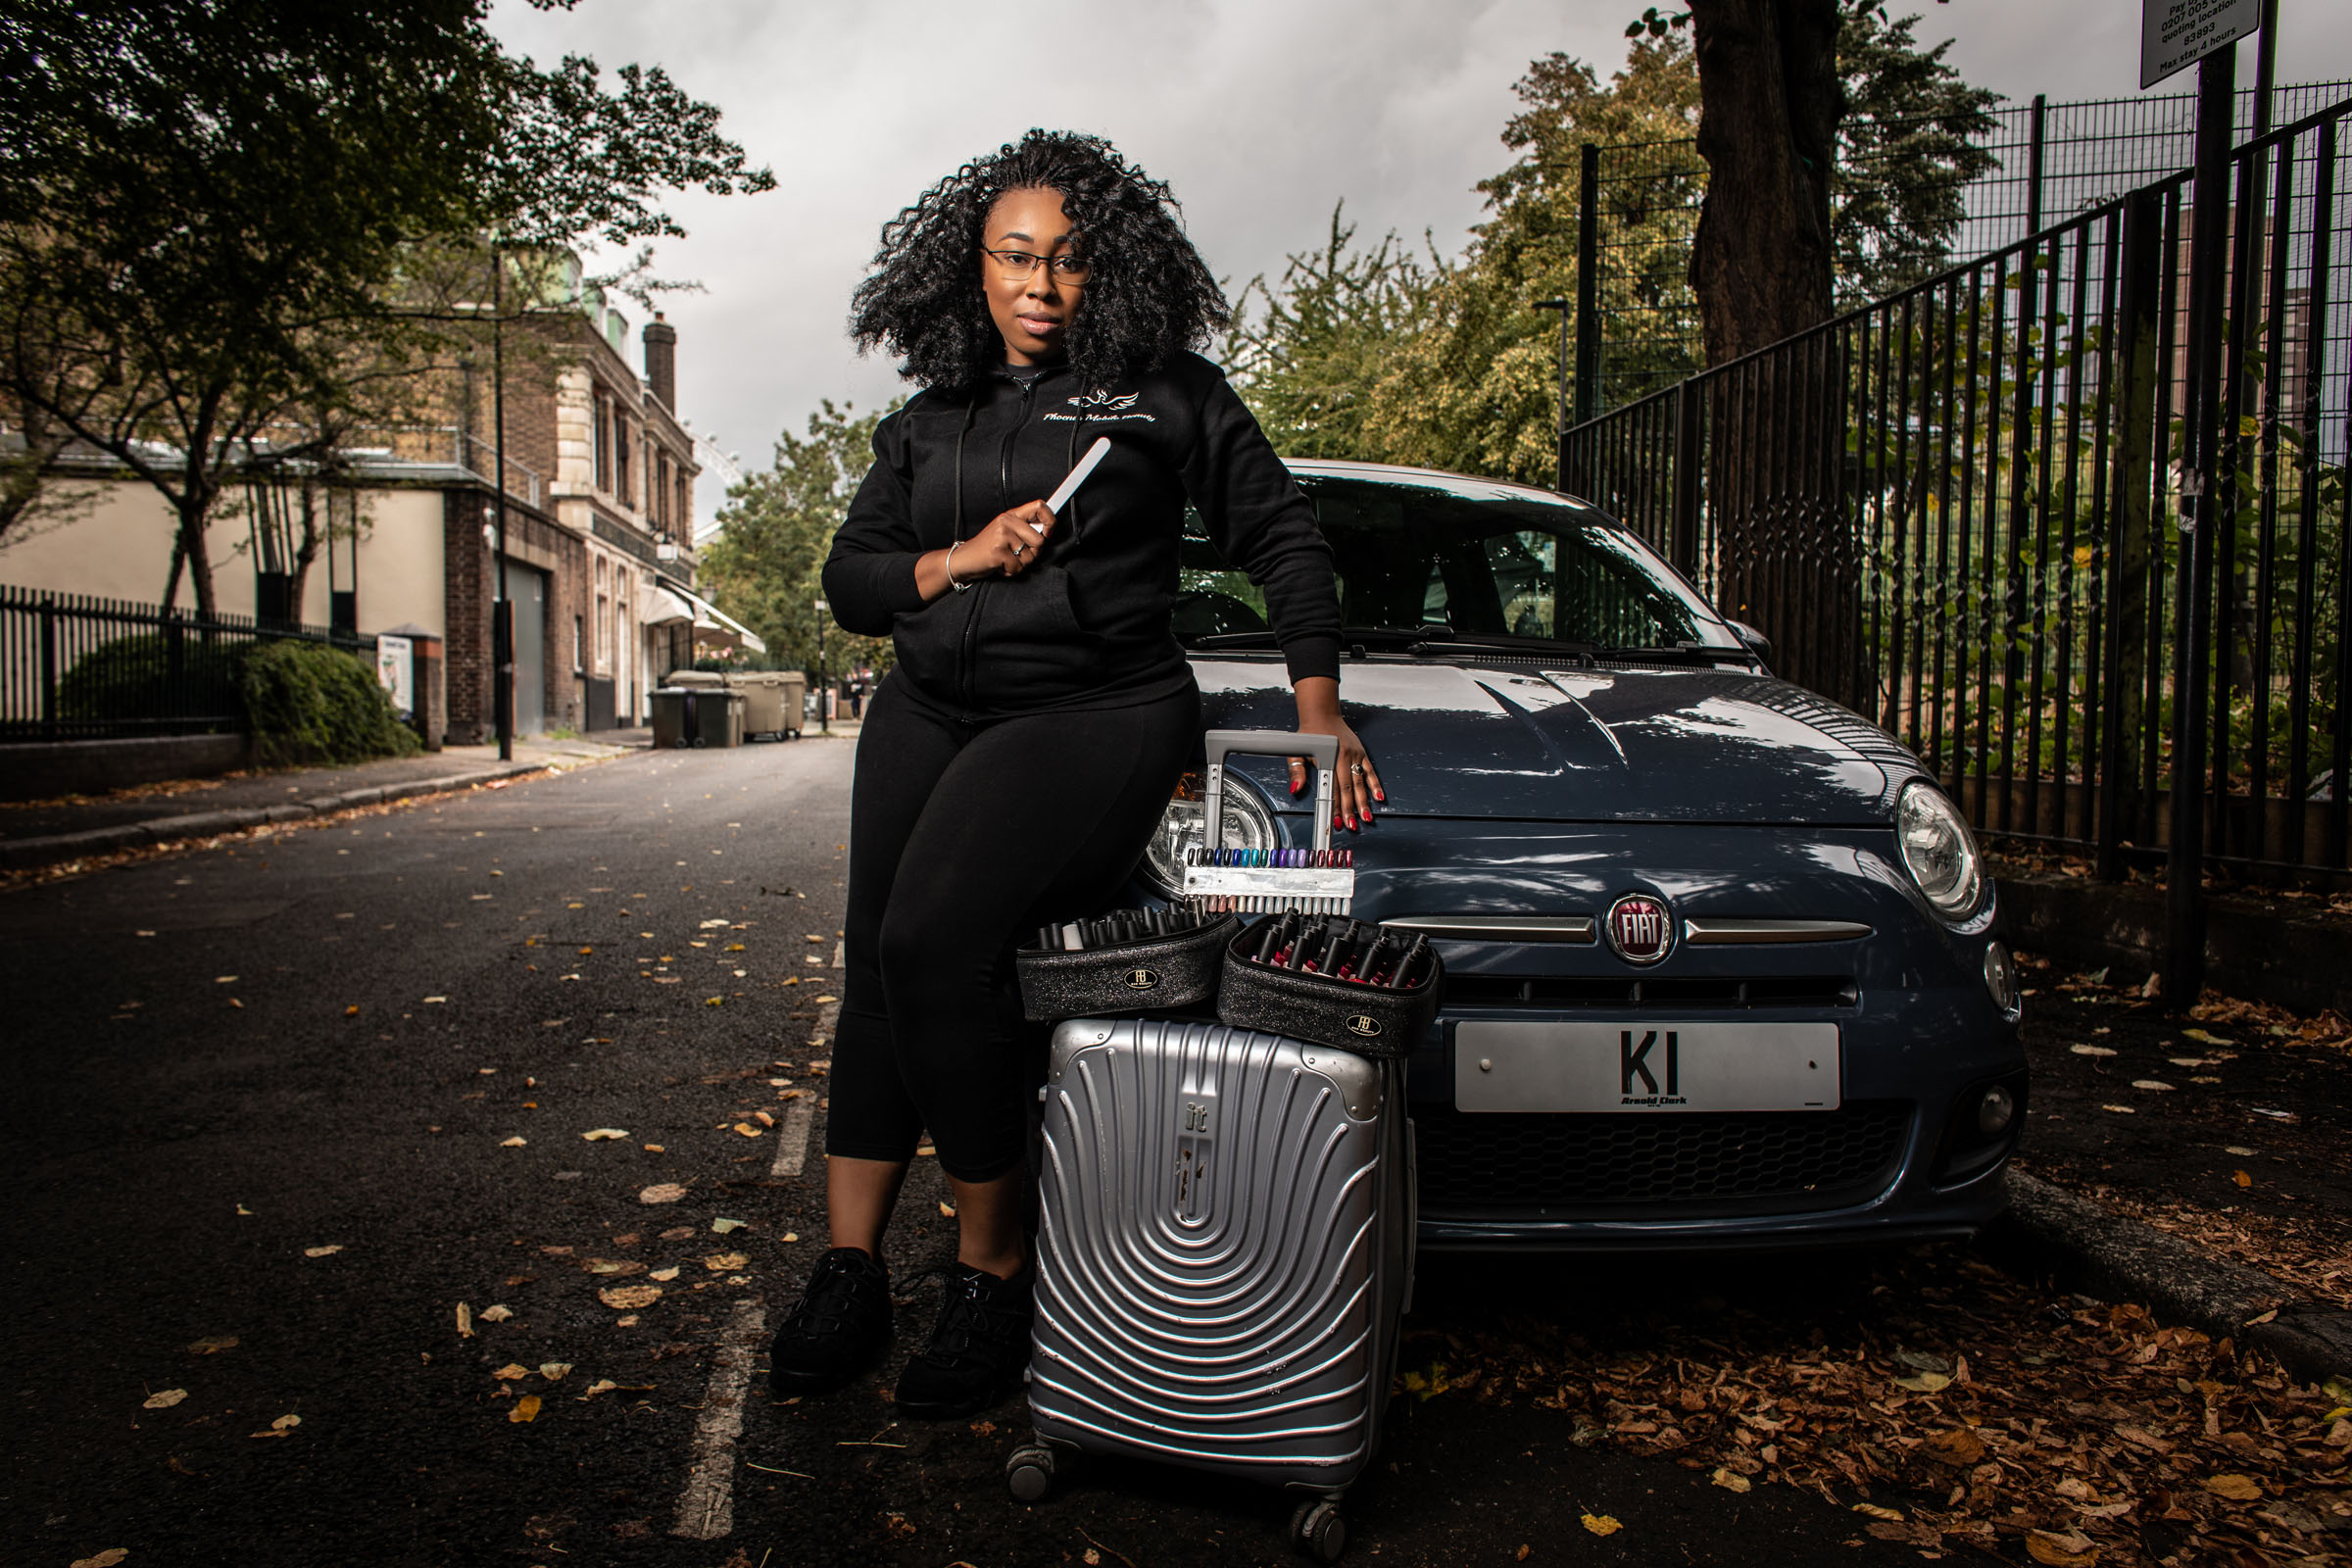 Mobile beautician Khristine with her car - part of a series looking at the efforts made by small businesses to keep running during Covid